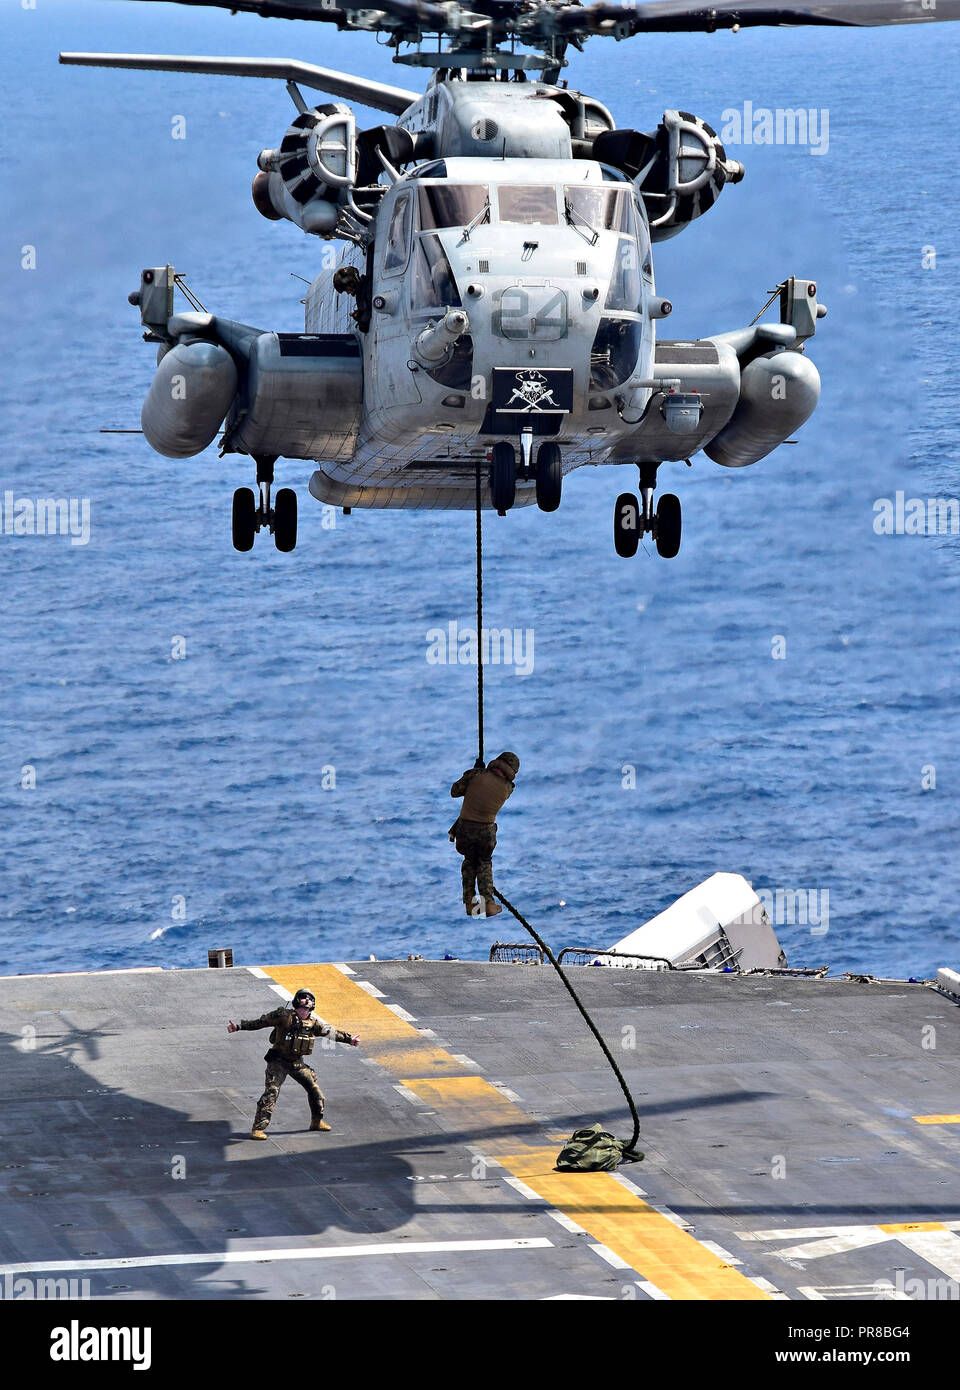 SOUTH CHINA SEA (Sept. 25, 2018) - Marines assigned to the 31st Marine Expeditionary Unit (MEU) rappel down a rope from a CH-53E Super Stallion helicopter assigned to the 'Flying Tigers' of Marine Medium Tiltrotor Squadron (VMM) 262 reenforced, as it hovers over the flight deck of the amphibious assault ship USS Wasp (LHD 1) during a fast rope exercise. Wasp, flagship of the Wasp Amphibious Ready Group, with embarked 31st MEU, is operating in the Indo-Pacific region to enhance interoperability with partners and serve as a ready-response force for any type of contingency. (U.S. Navy photo by Ma Stock Photo